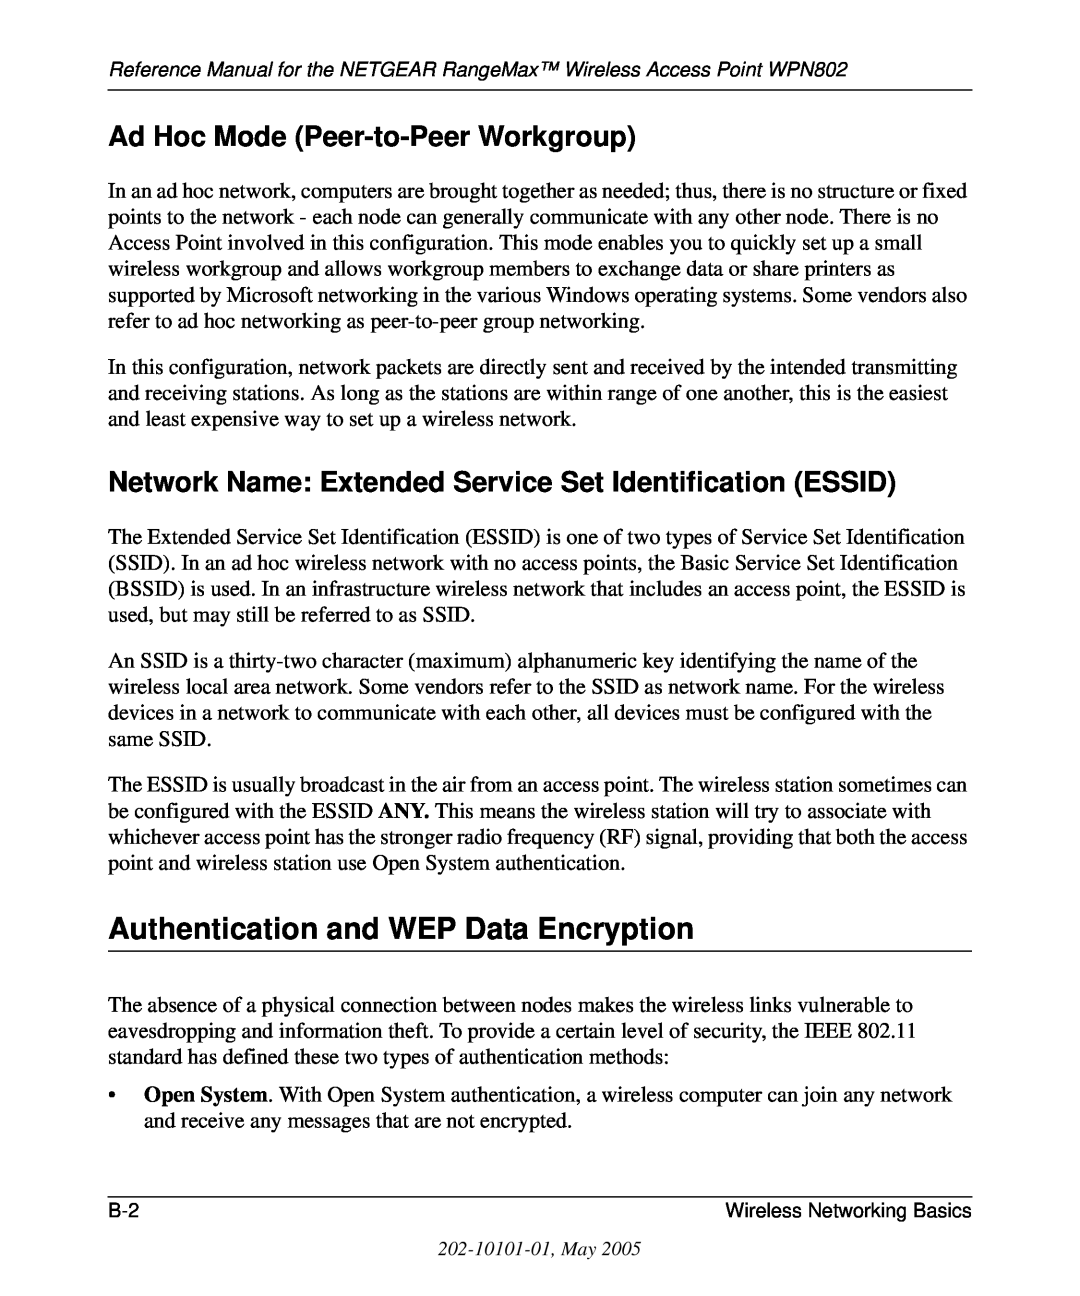 NETGEAR WPN802 manual Authentication and WEP Data Encryption, Ad Hoc Mode Peer-to-Peer Workgroup 